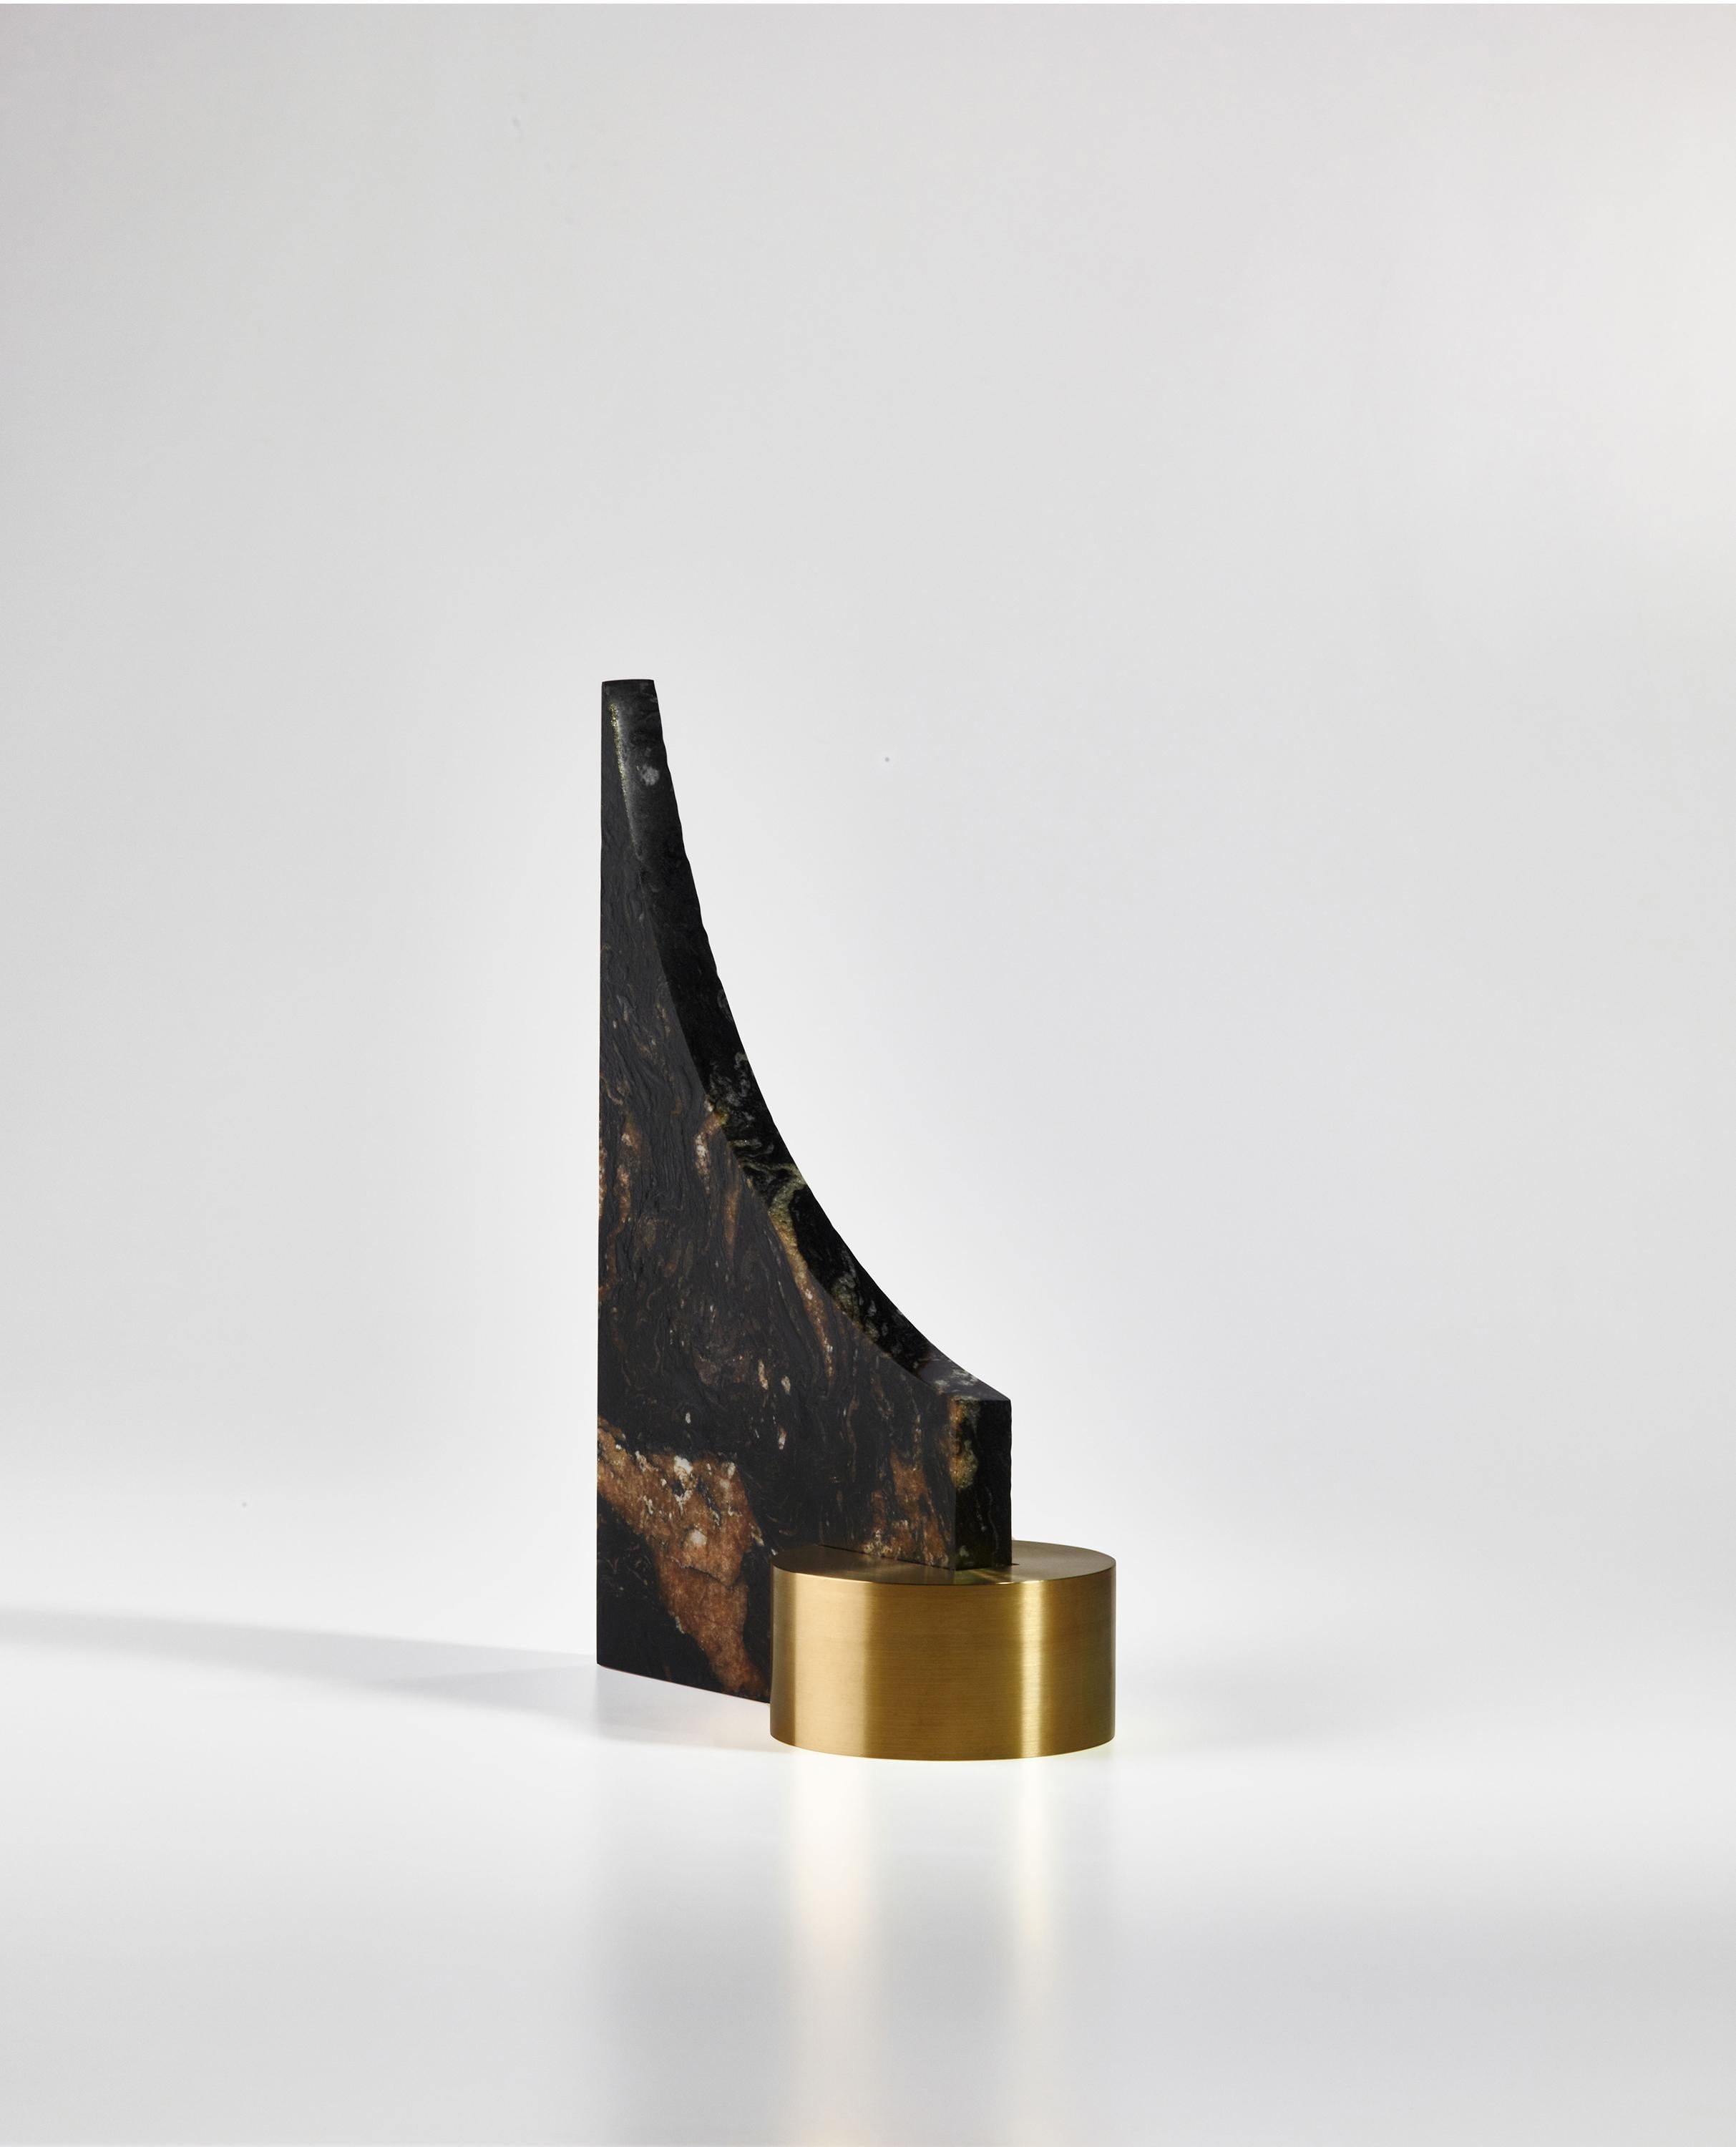 One of three new collection pieces created by the young French designer from Bordeau, William Guillon, Ultraviolence is a bookend composed of a 2 cm thick plate of Barocco granite and a split cylinder of solid brass. The stone is polished shiny on